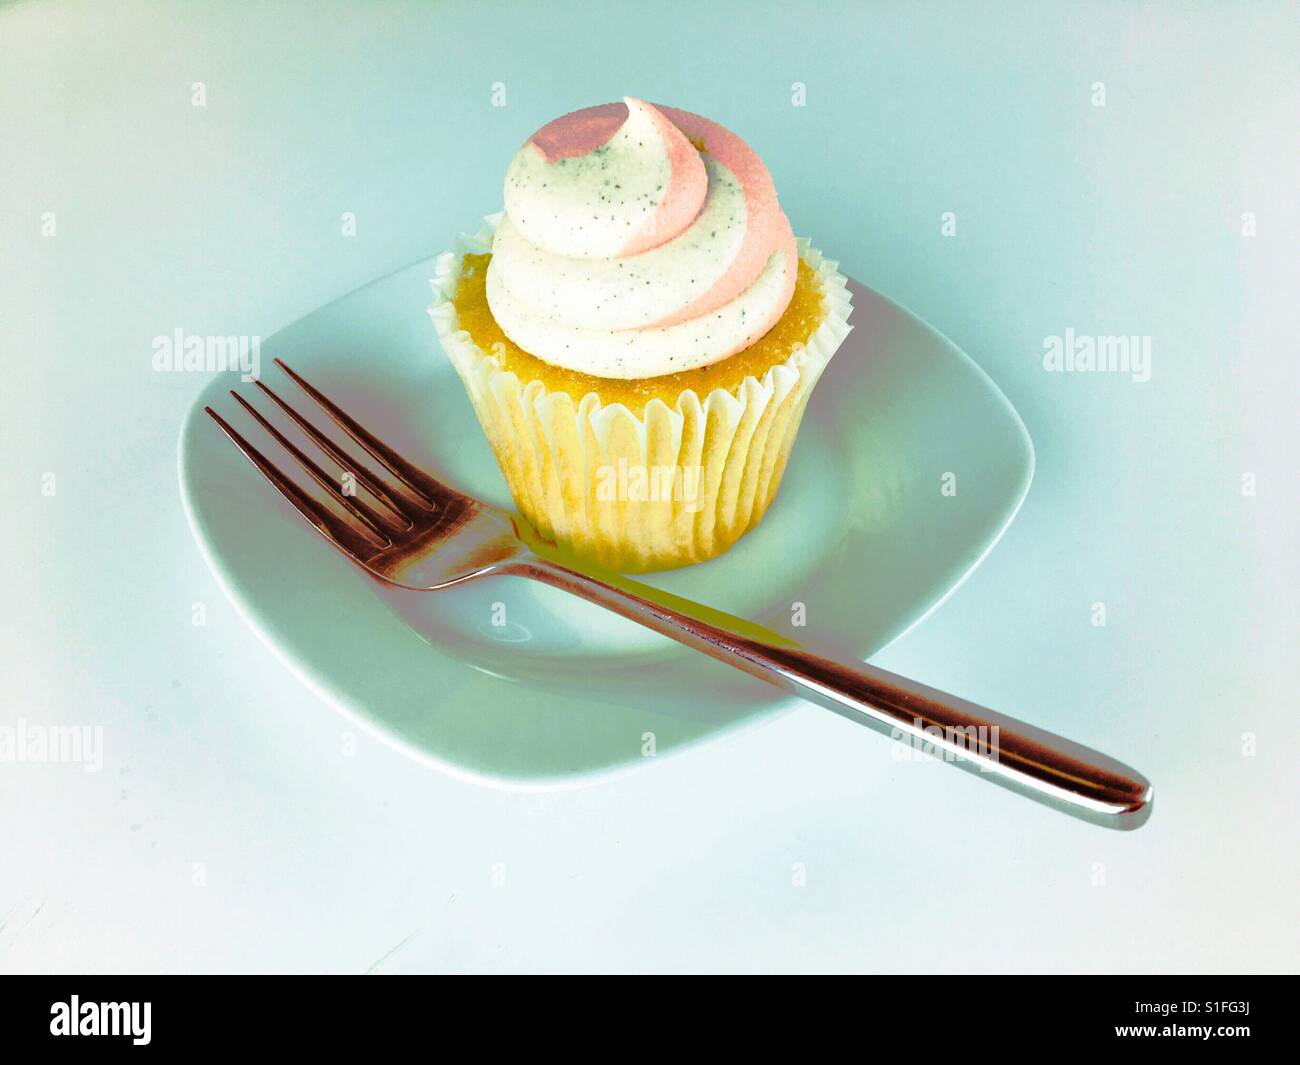 Cupcake on a plate with fork. Room for copy. Stock Photo